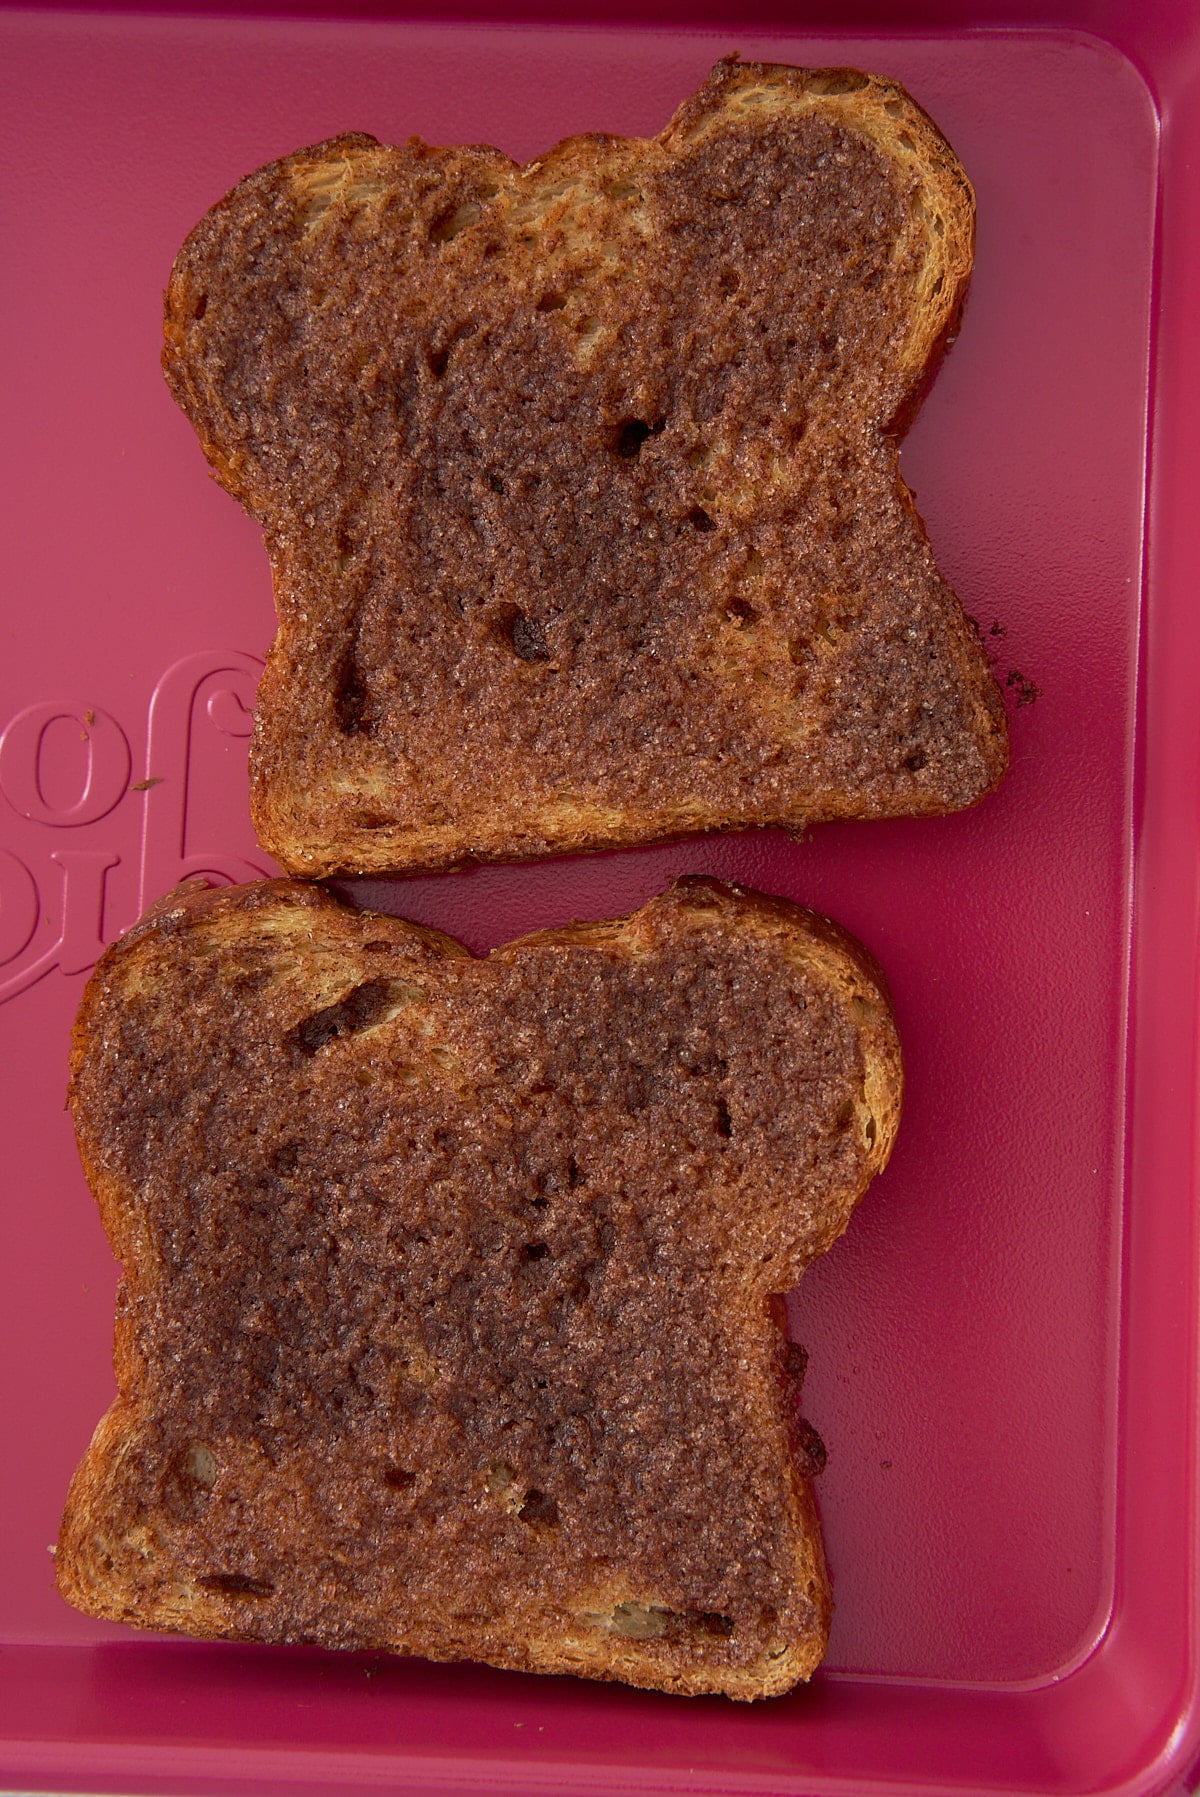 A tray with 2 slices of toasted whole wheat bread topped with cinnamon sugar butter.